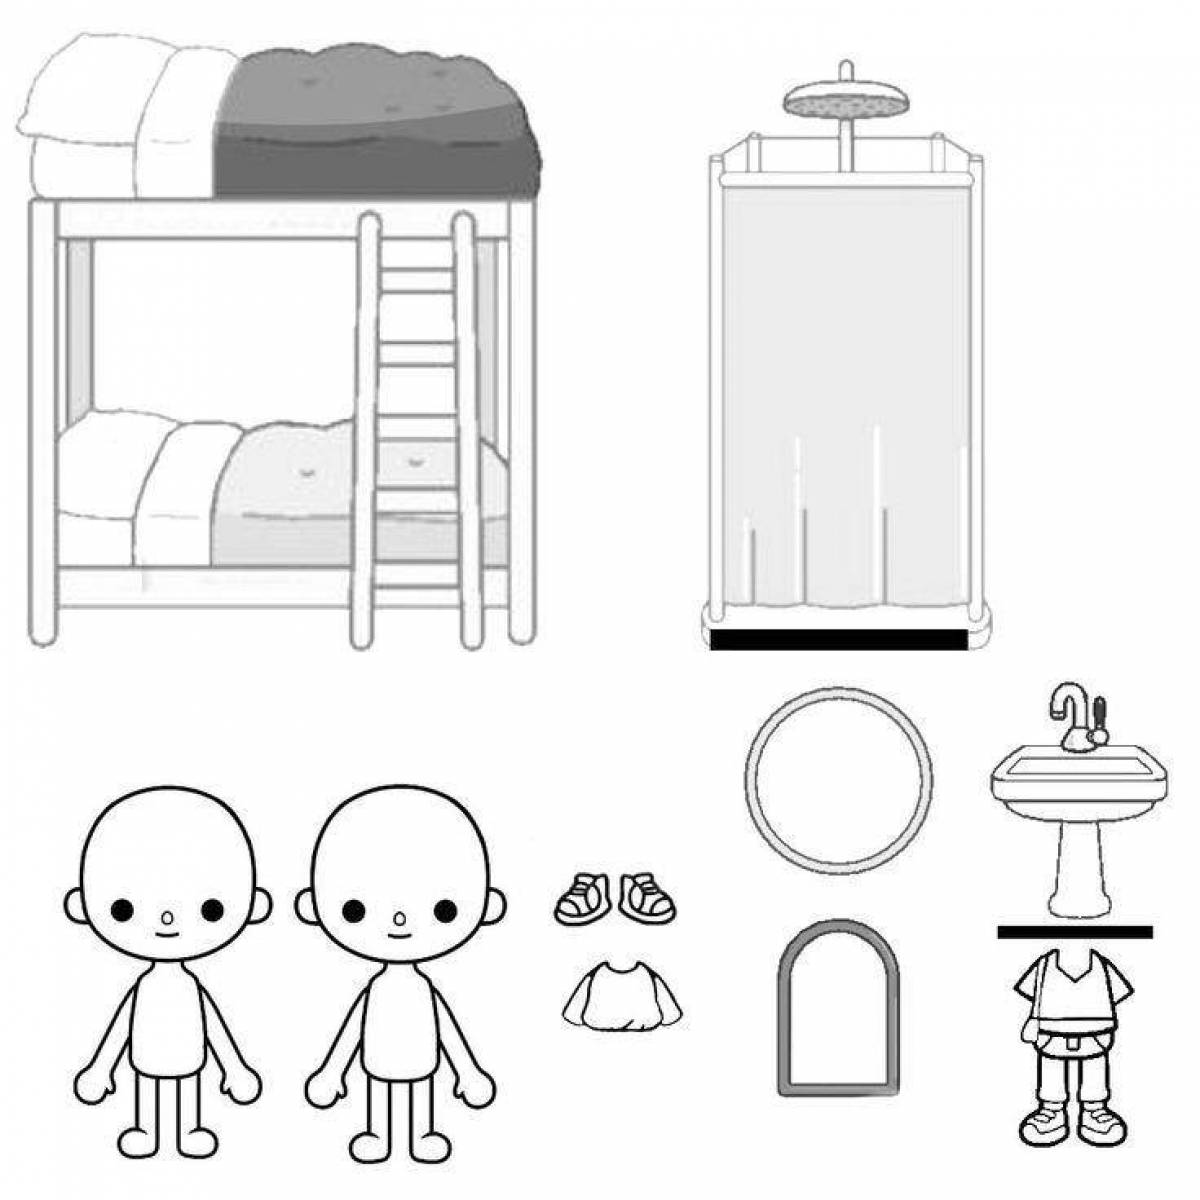 Stylish side furniture coloring page